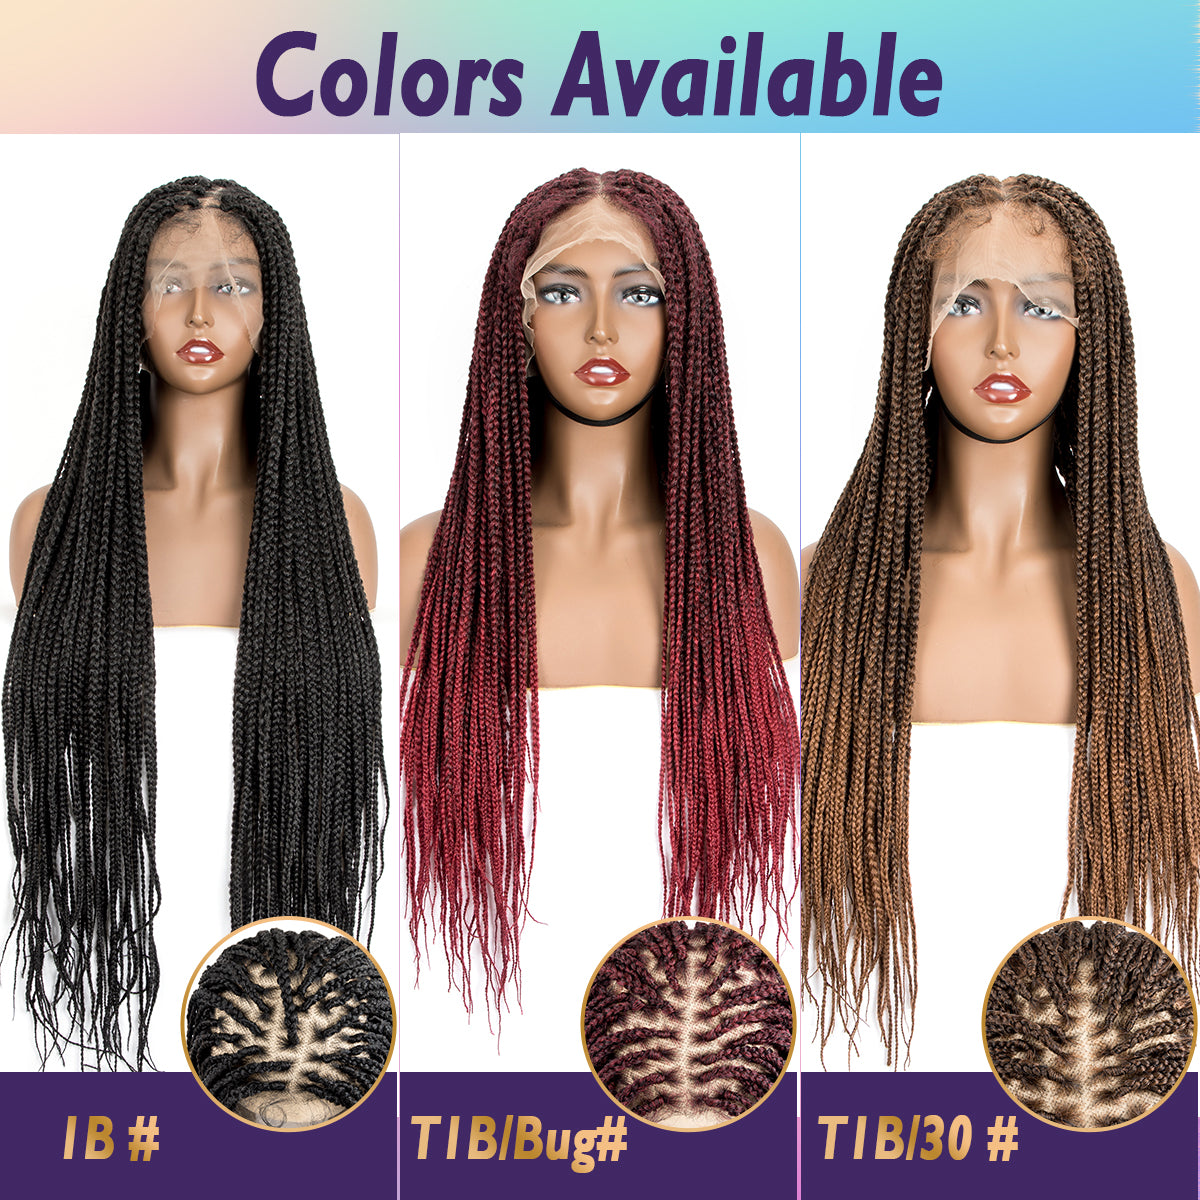 36" Box Braided Wigs Full Lace Knotless Box Braids Wig for Women Synthetic Braided Wig With Baby Hair